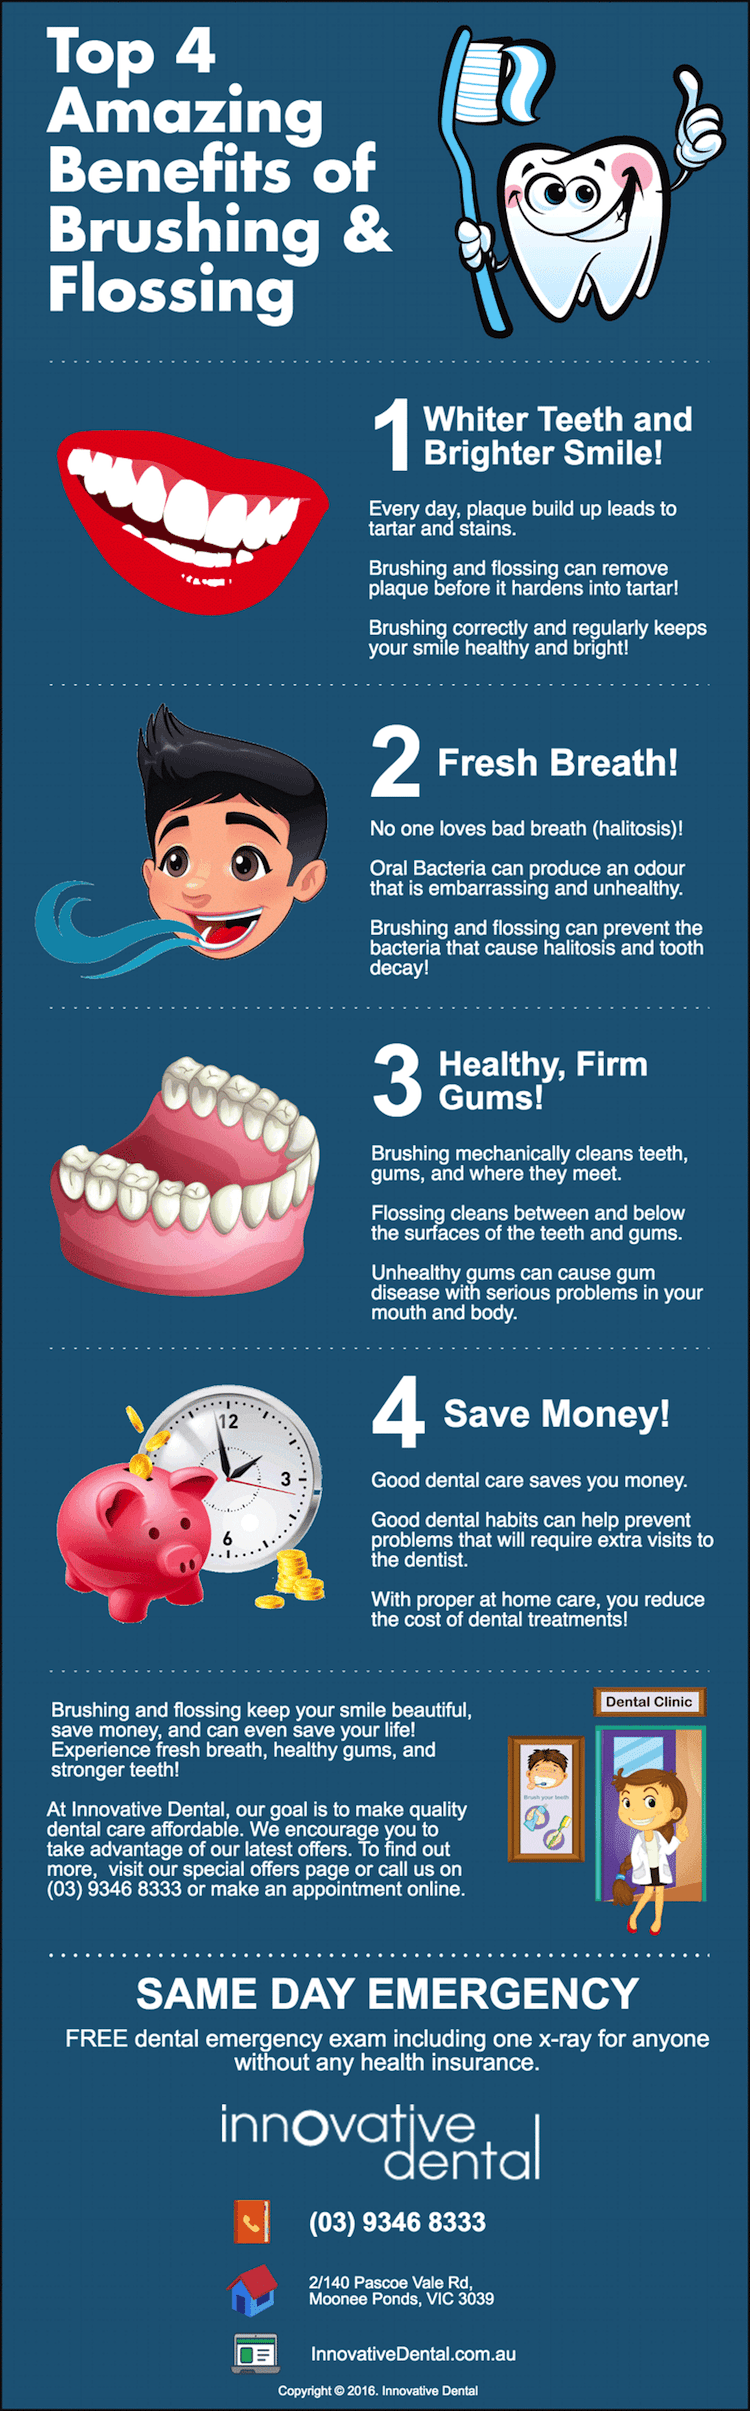 Top 4 Amazing Benefits of Brushing and Flossing